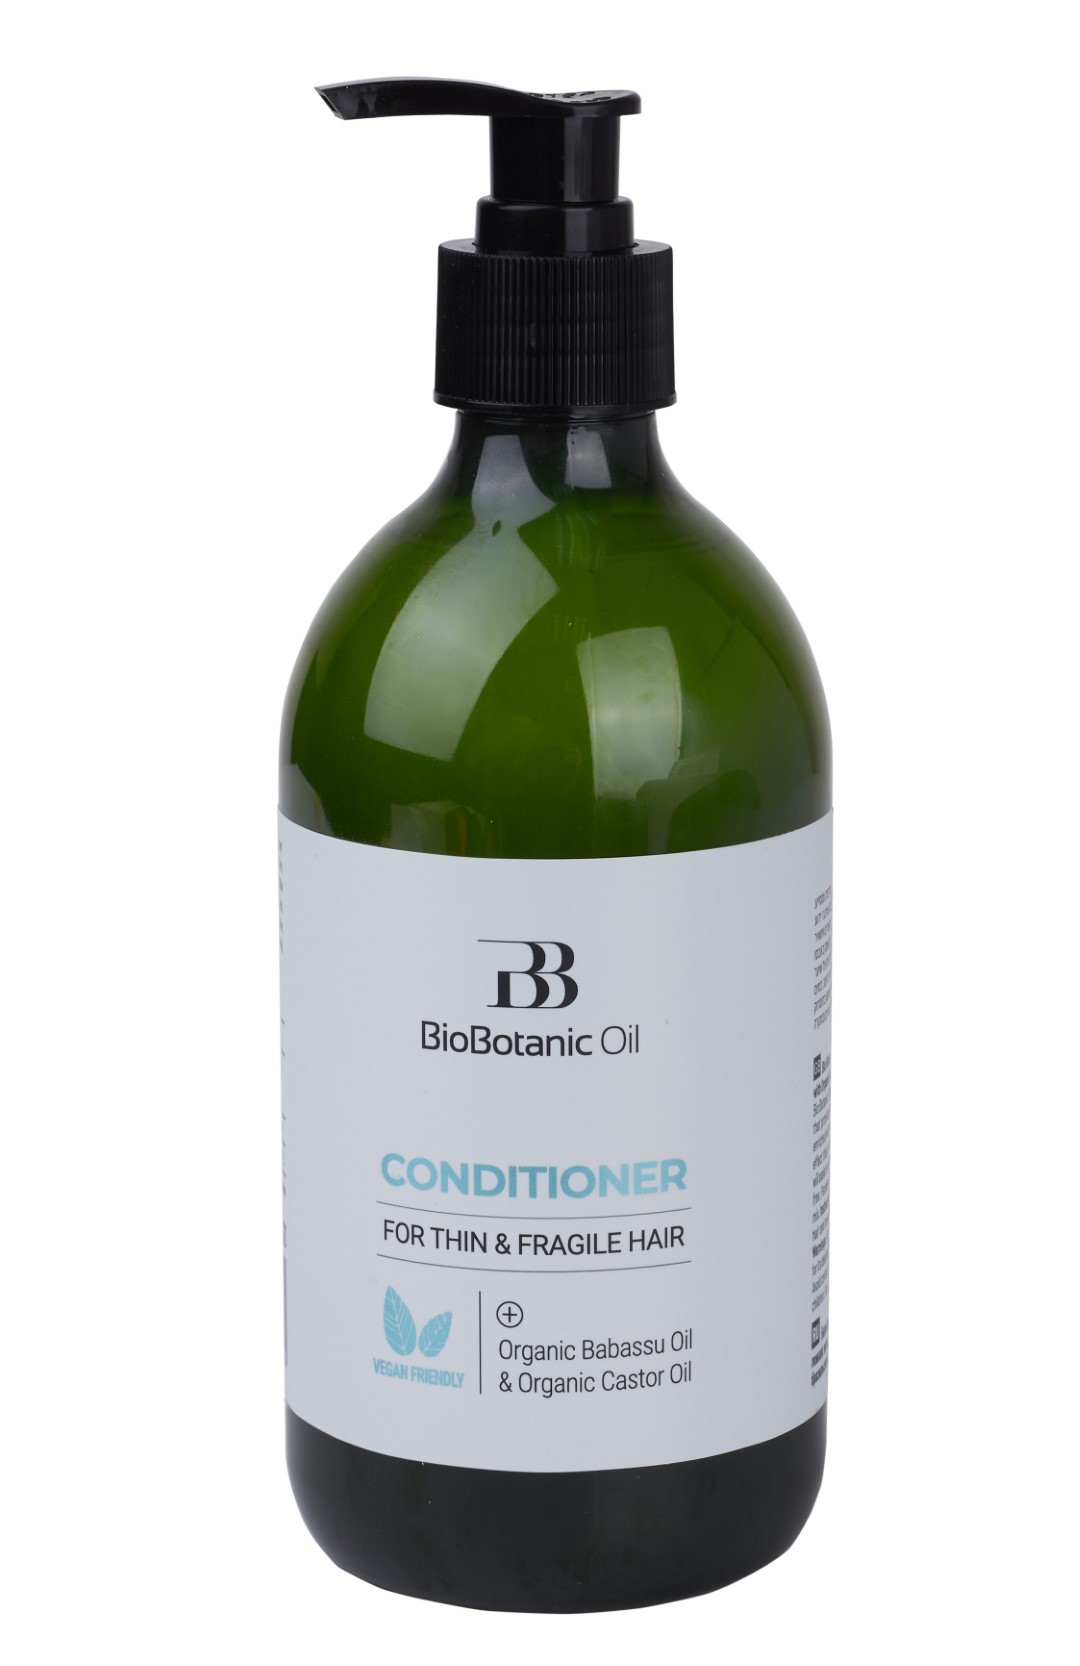 Conditioner for thin and fragile hair